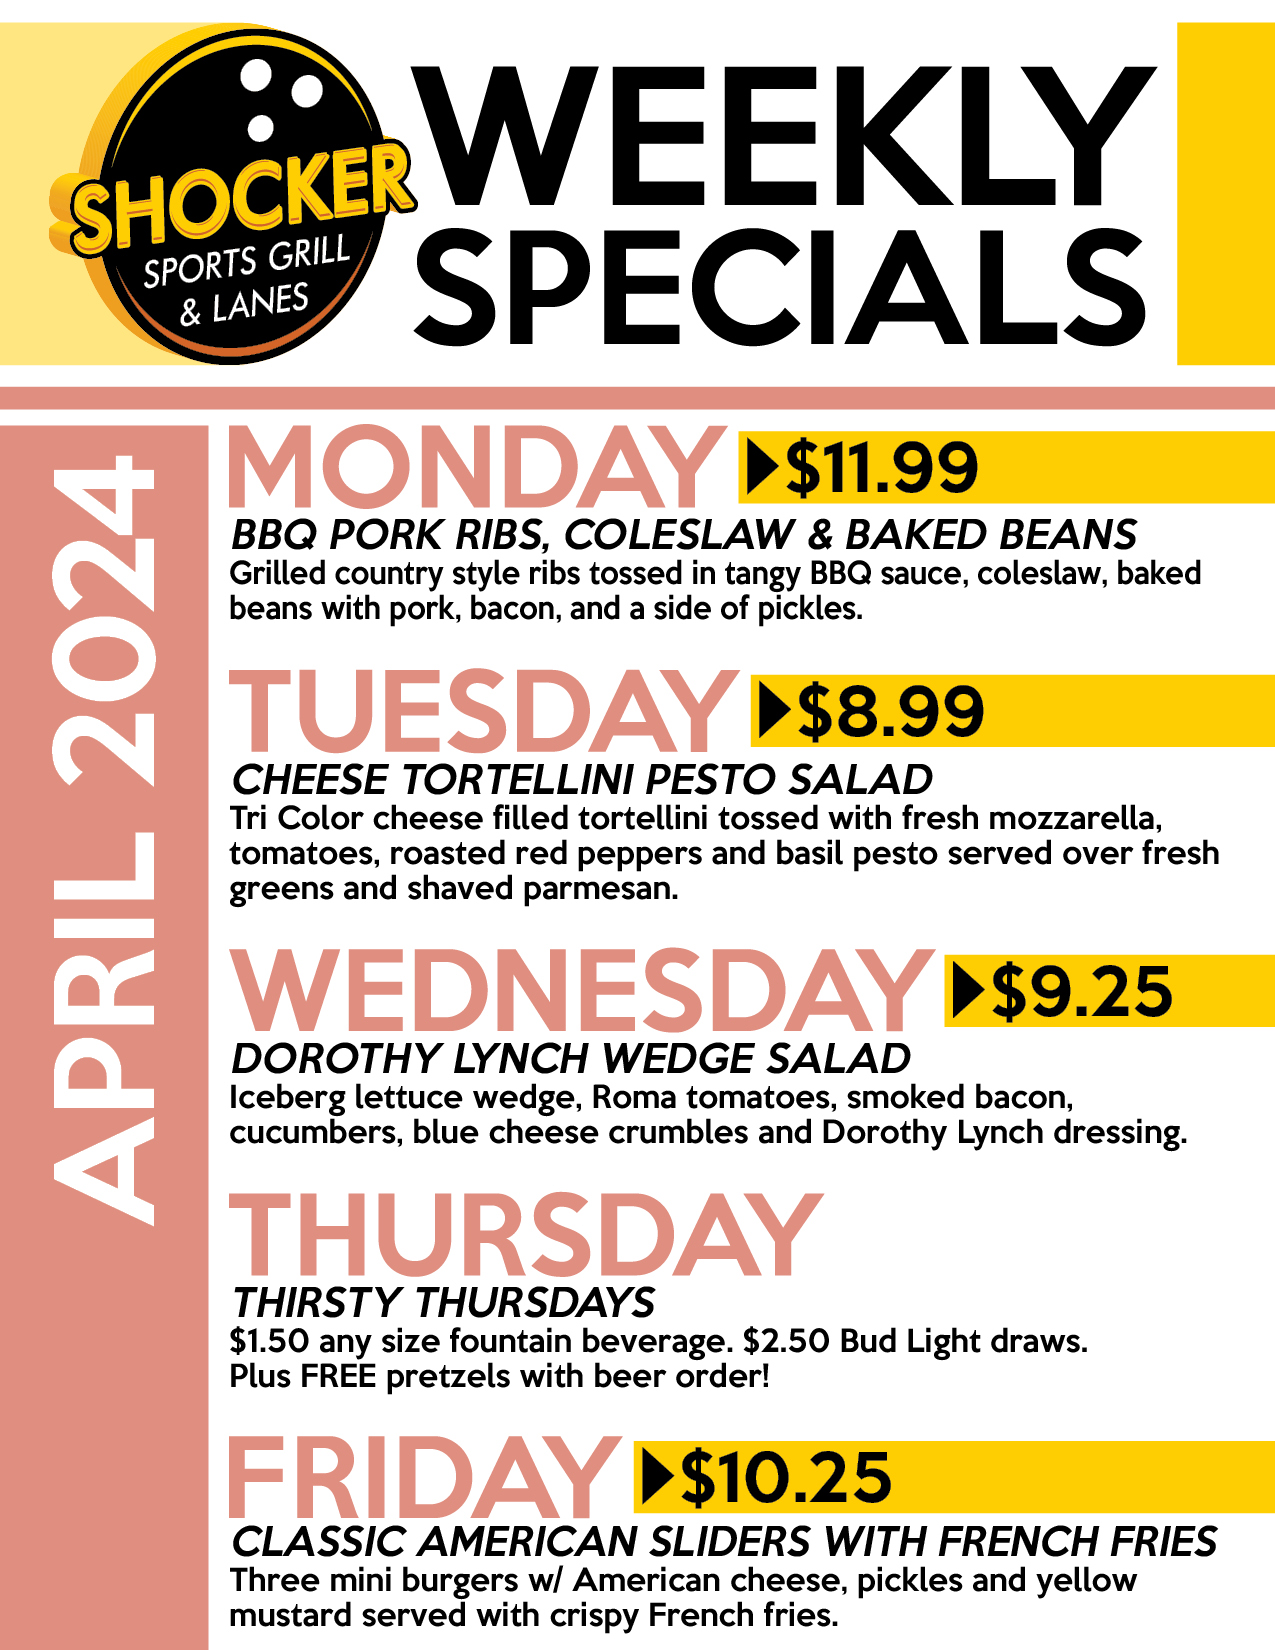 SSGL Weekly Specials. For text version, click on "Text Version" link above.